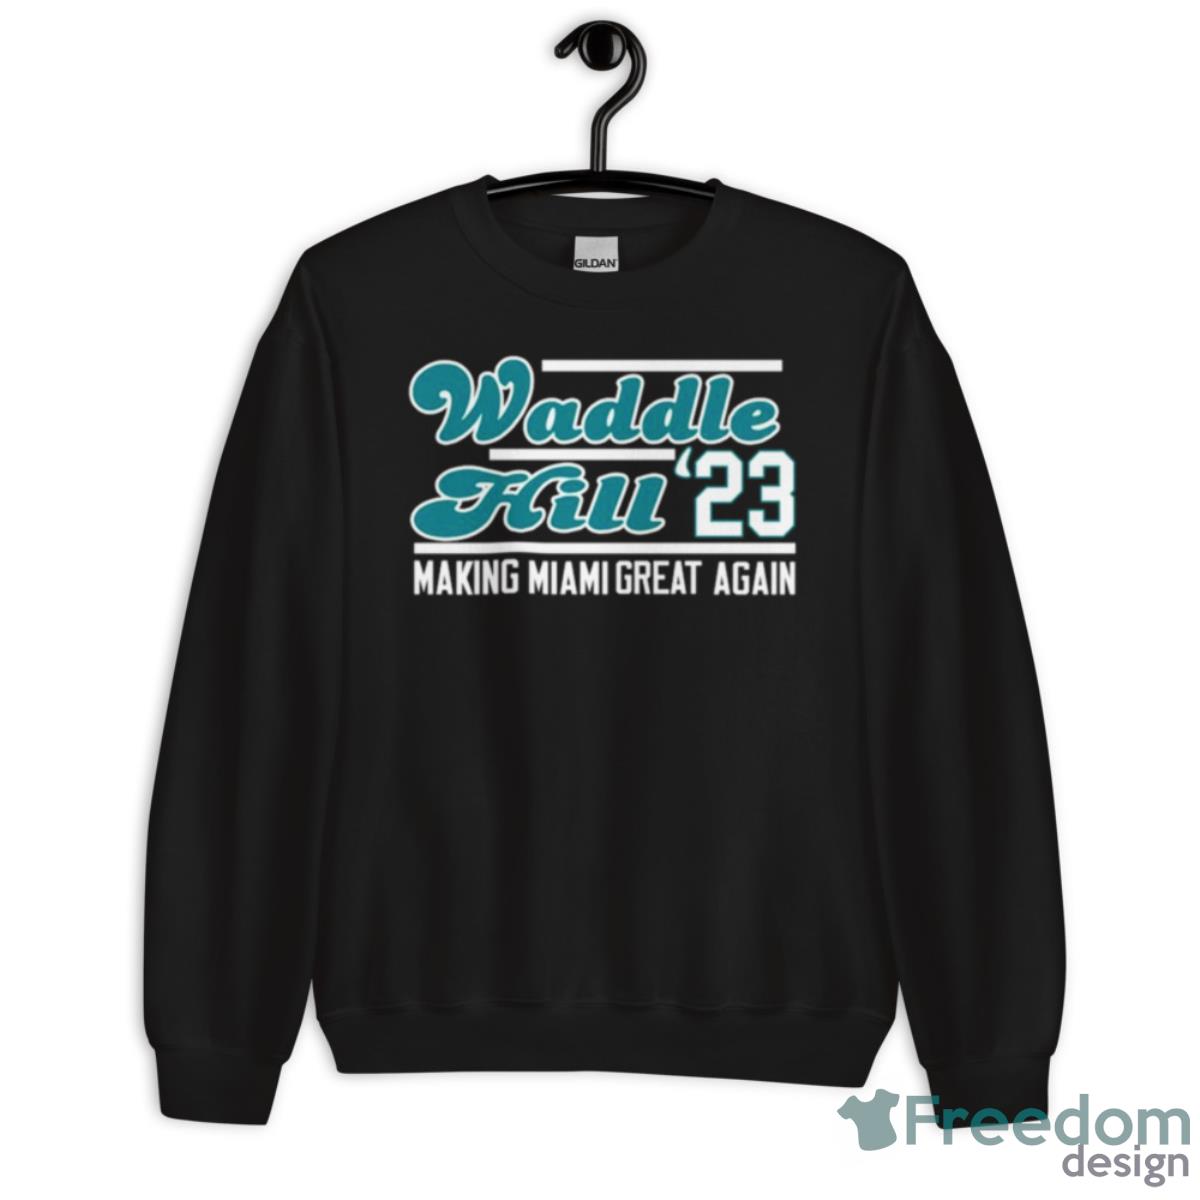 Waddle Hill 23 Making Miami Great Again 2023 Shirt